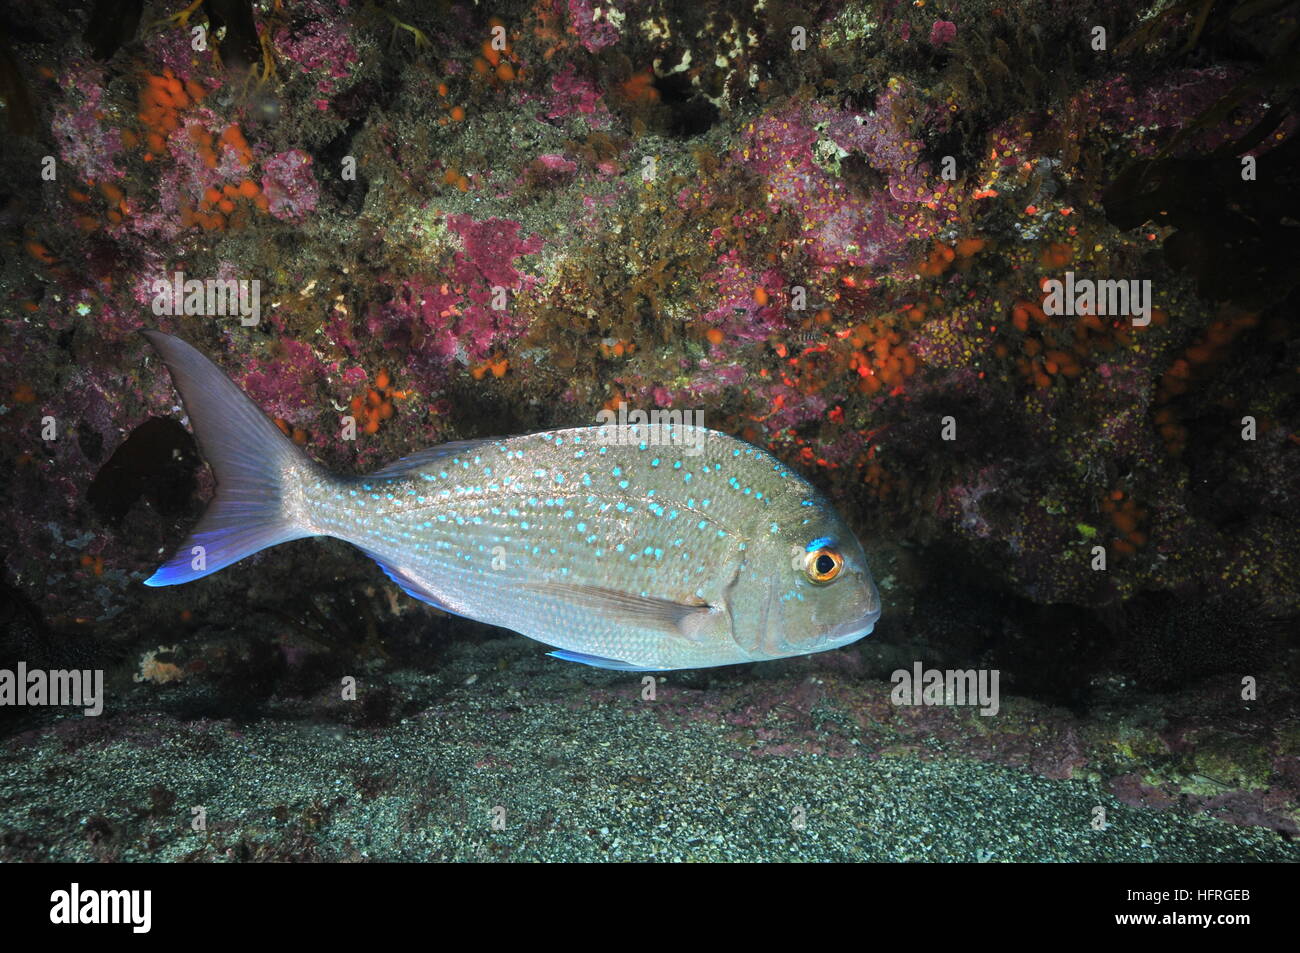 Australasian snapper in front of rocky wall Stock Photo